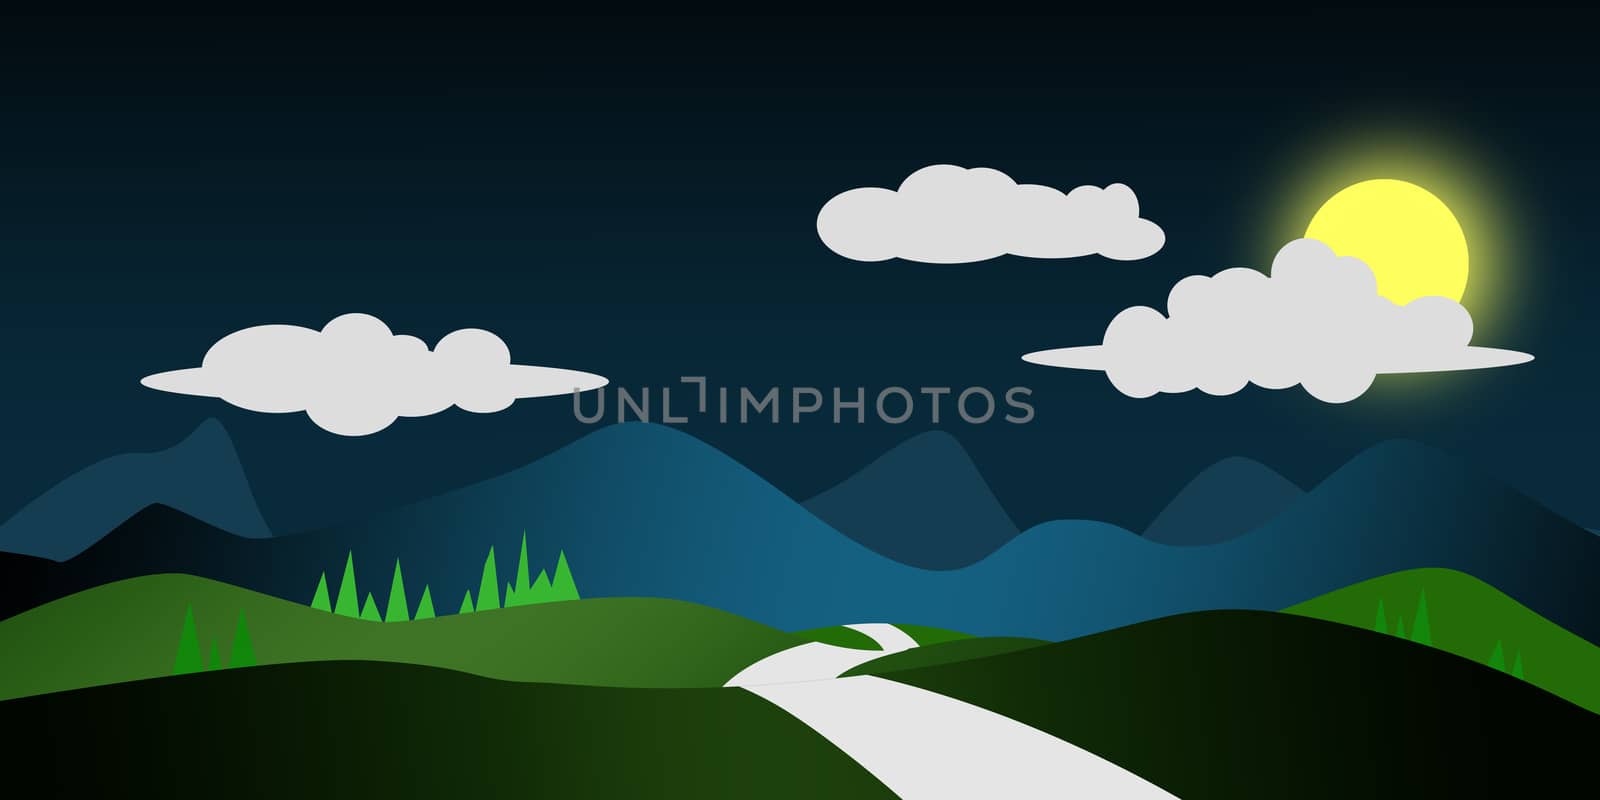 Mountains landscape with pines and hills at night by tang90246